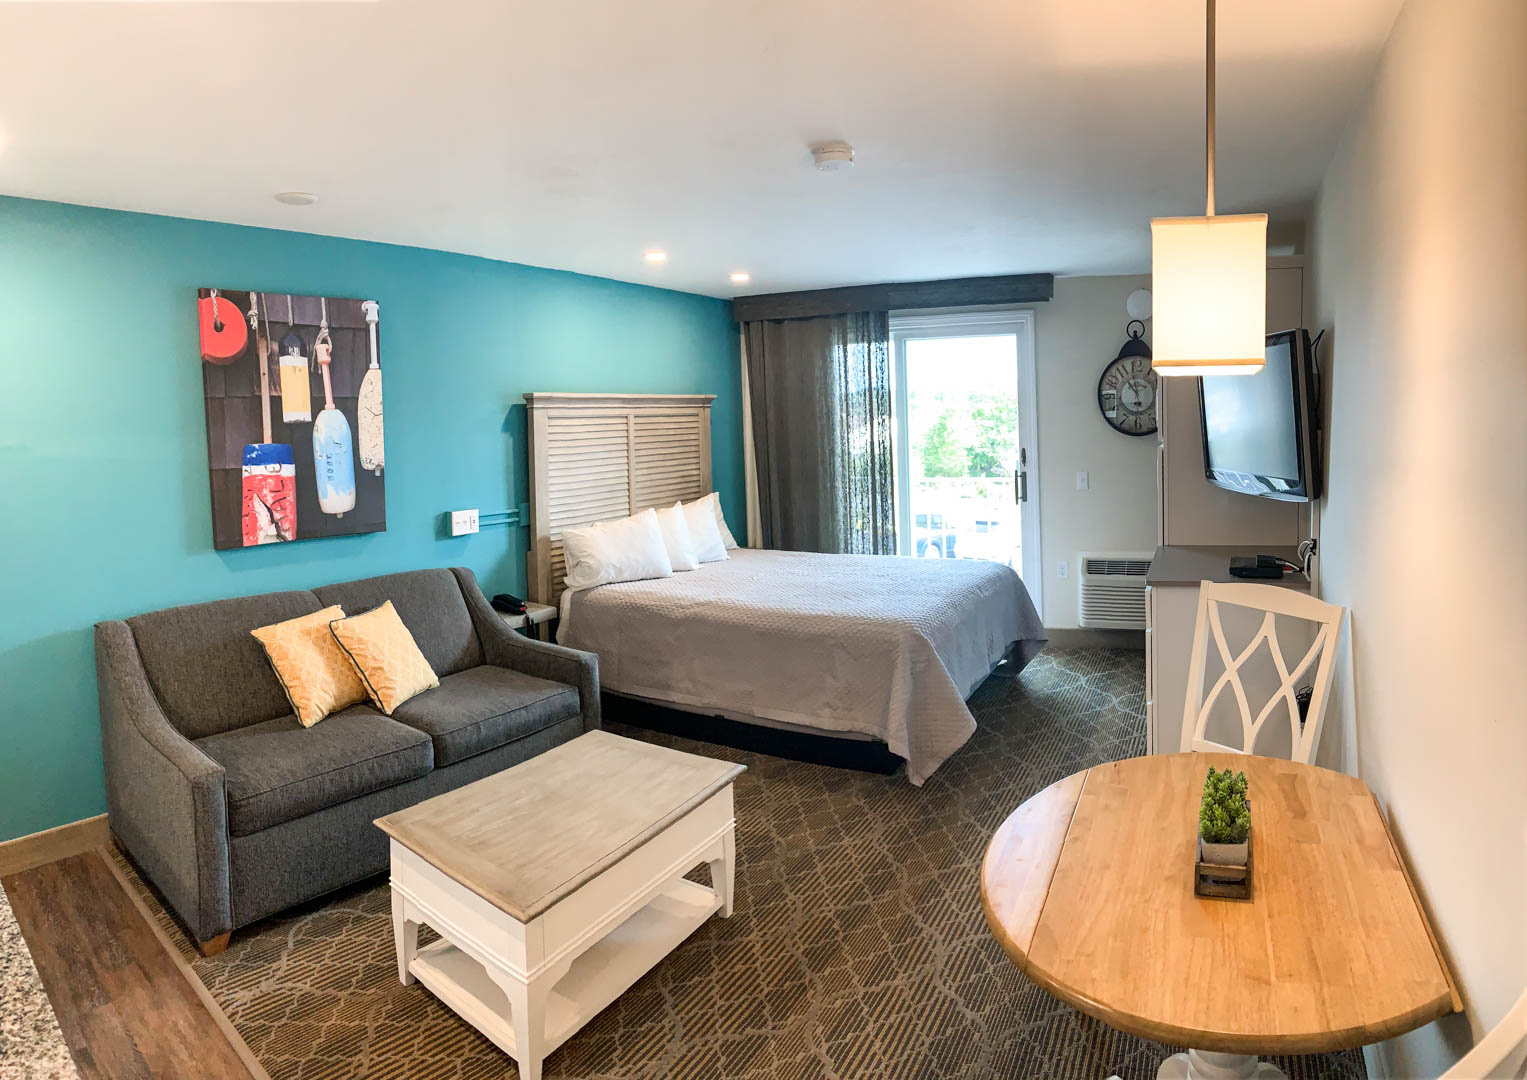 A modern one bedroom unit at VRI's Riverview Resort in Massachusetts.